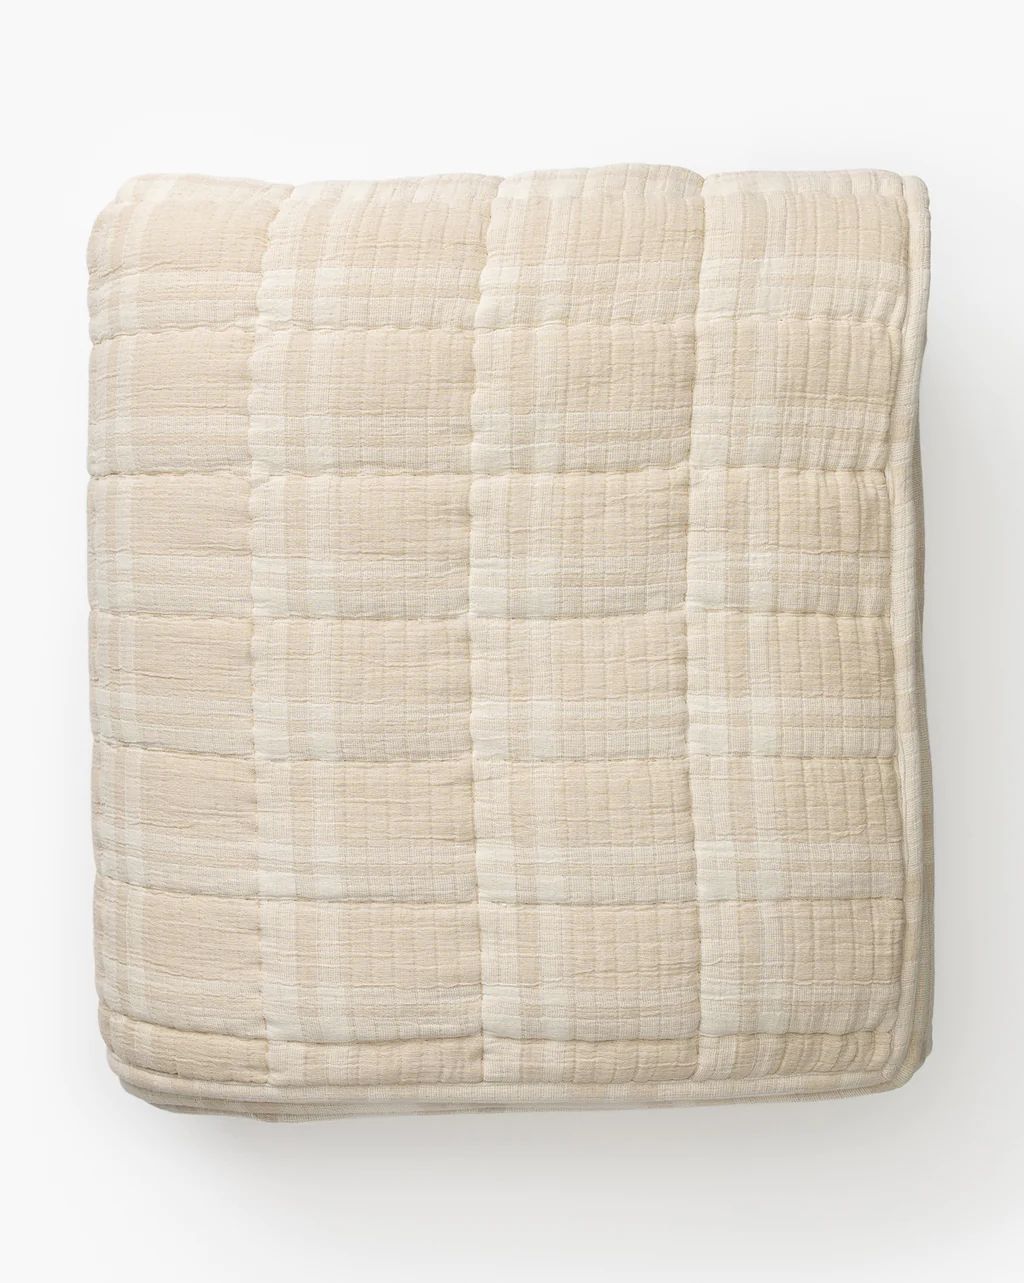 Briony Gauze Quilt | McGee & Co.